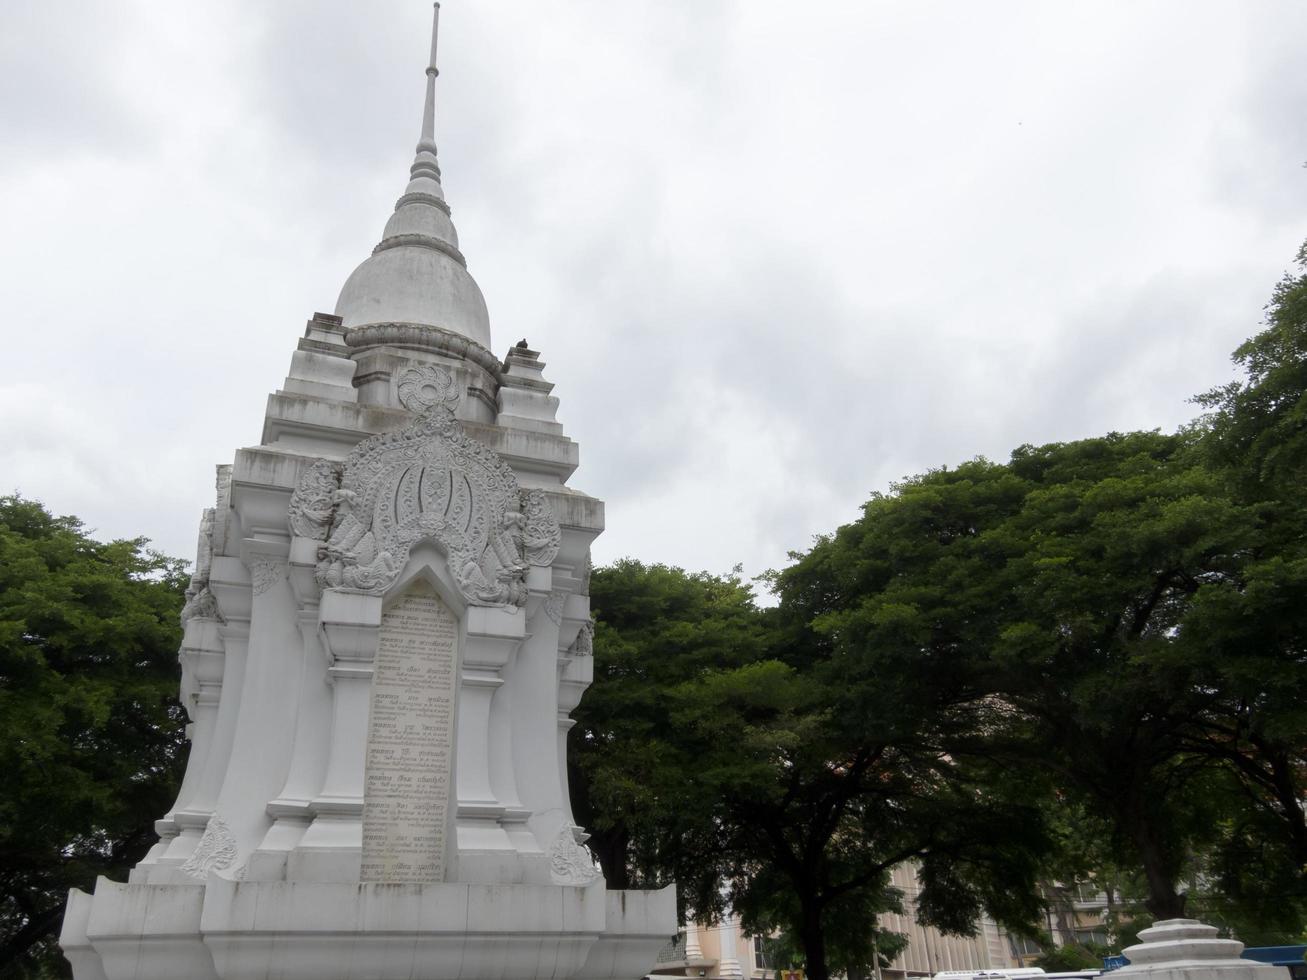 World War I Volunteer Monument BANGKOKTHAILAND10 AUGUST 2018 The memorial of the Thai soldiers who fought in World War I and the Allies and won. on10 AUGUST 2018 in Thailand. photo